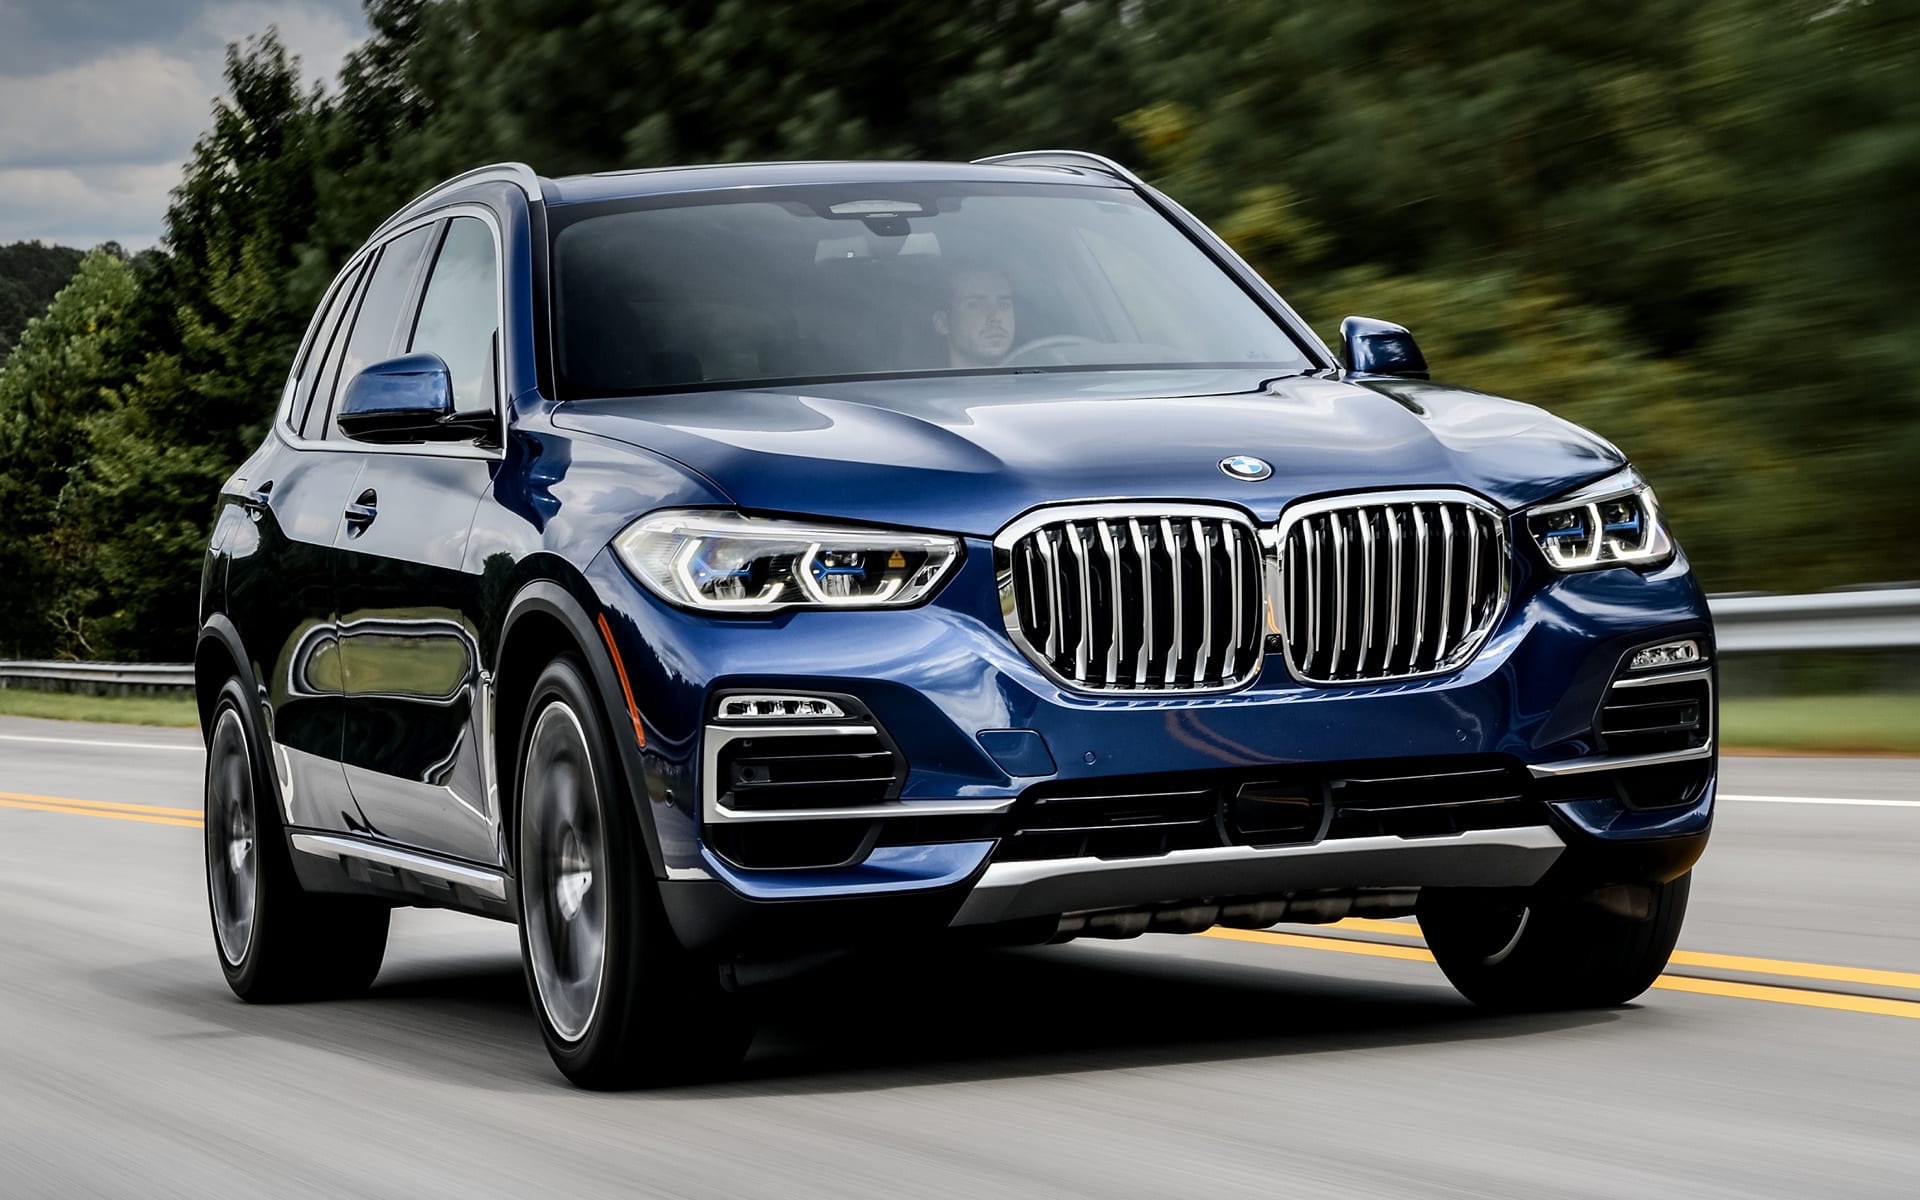 2021 US Midsize Luxury SUV Sales Figures By Model | GCBC